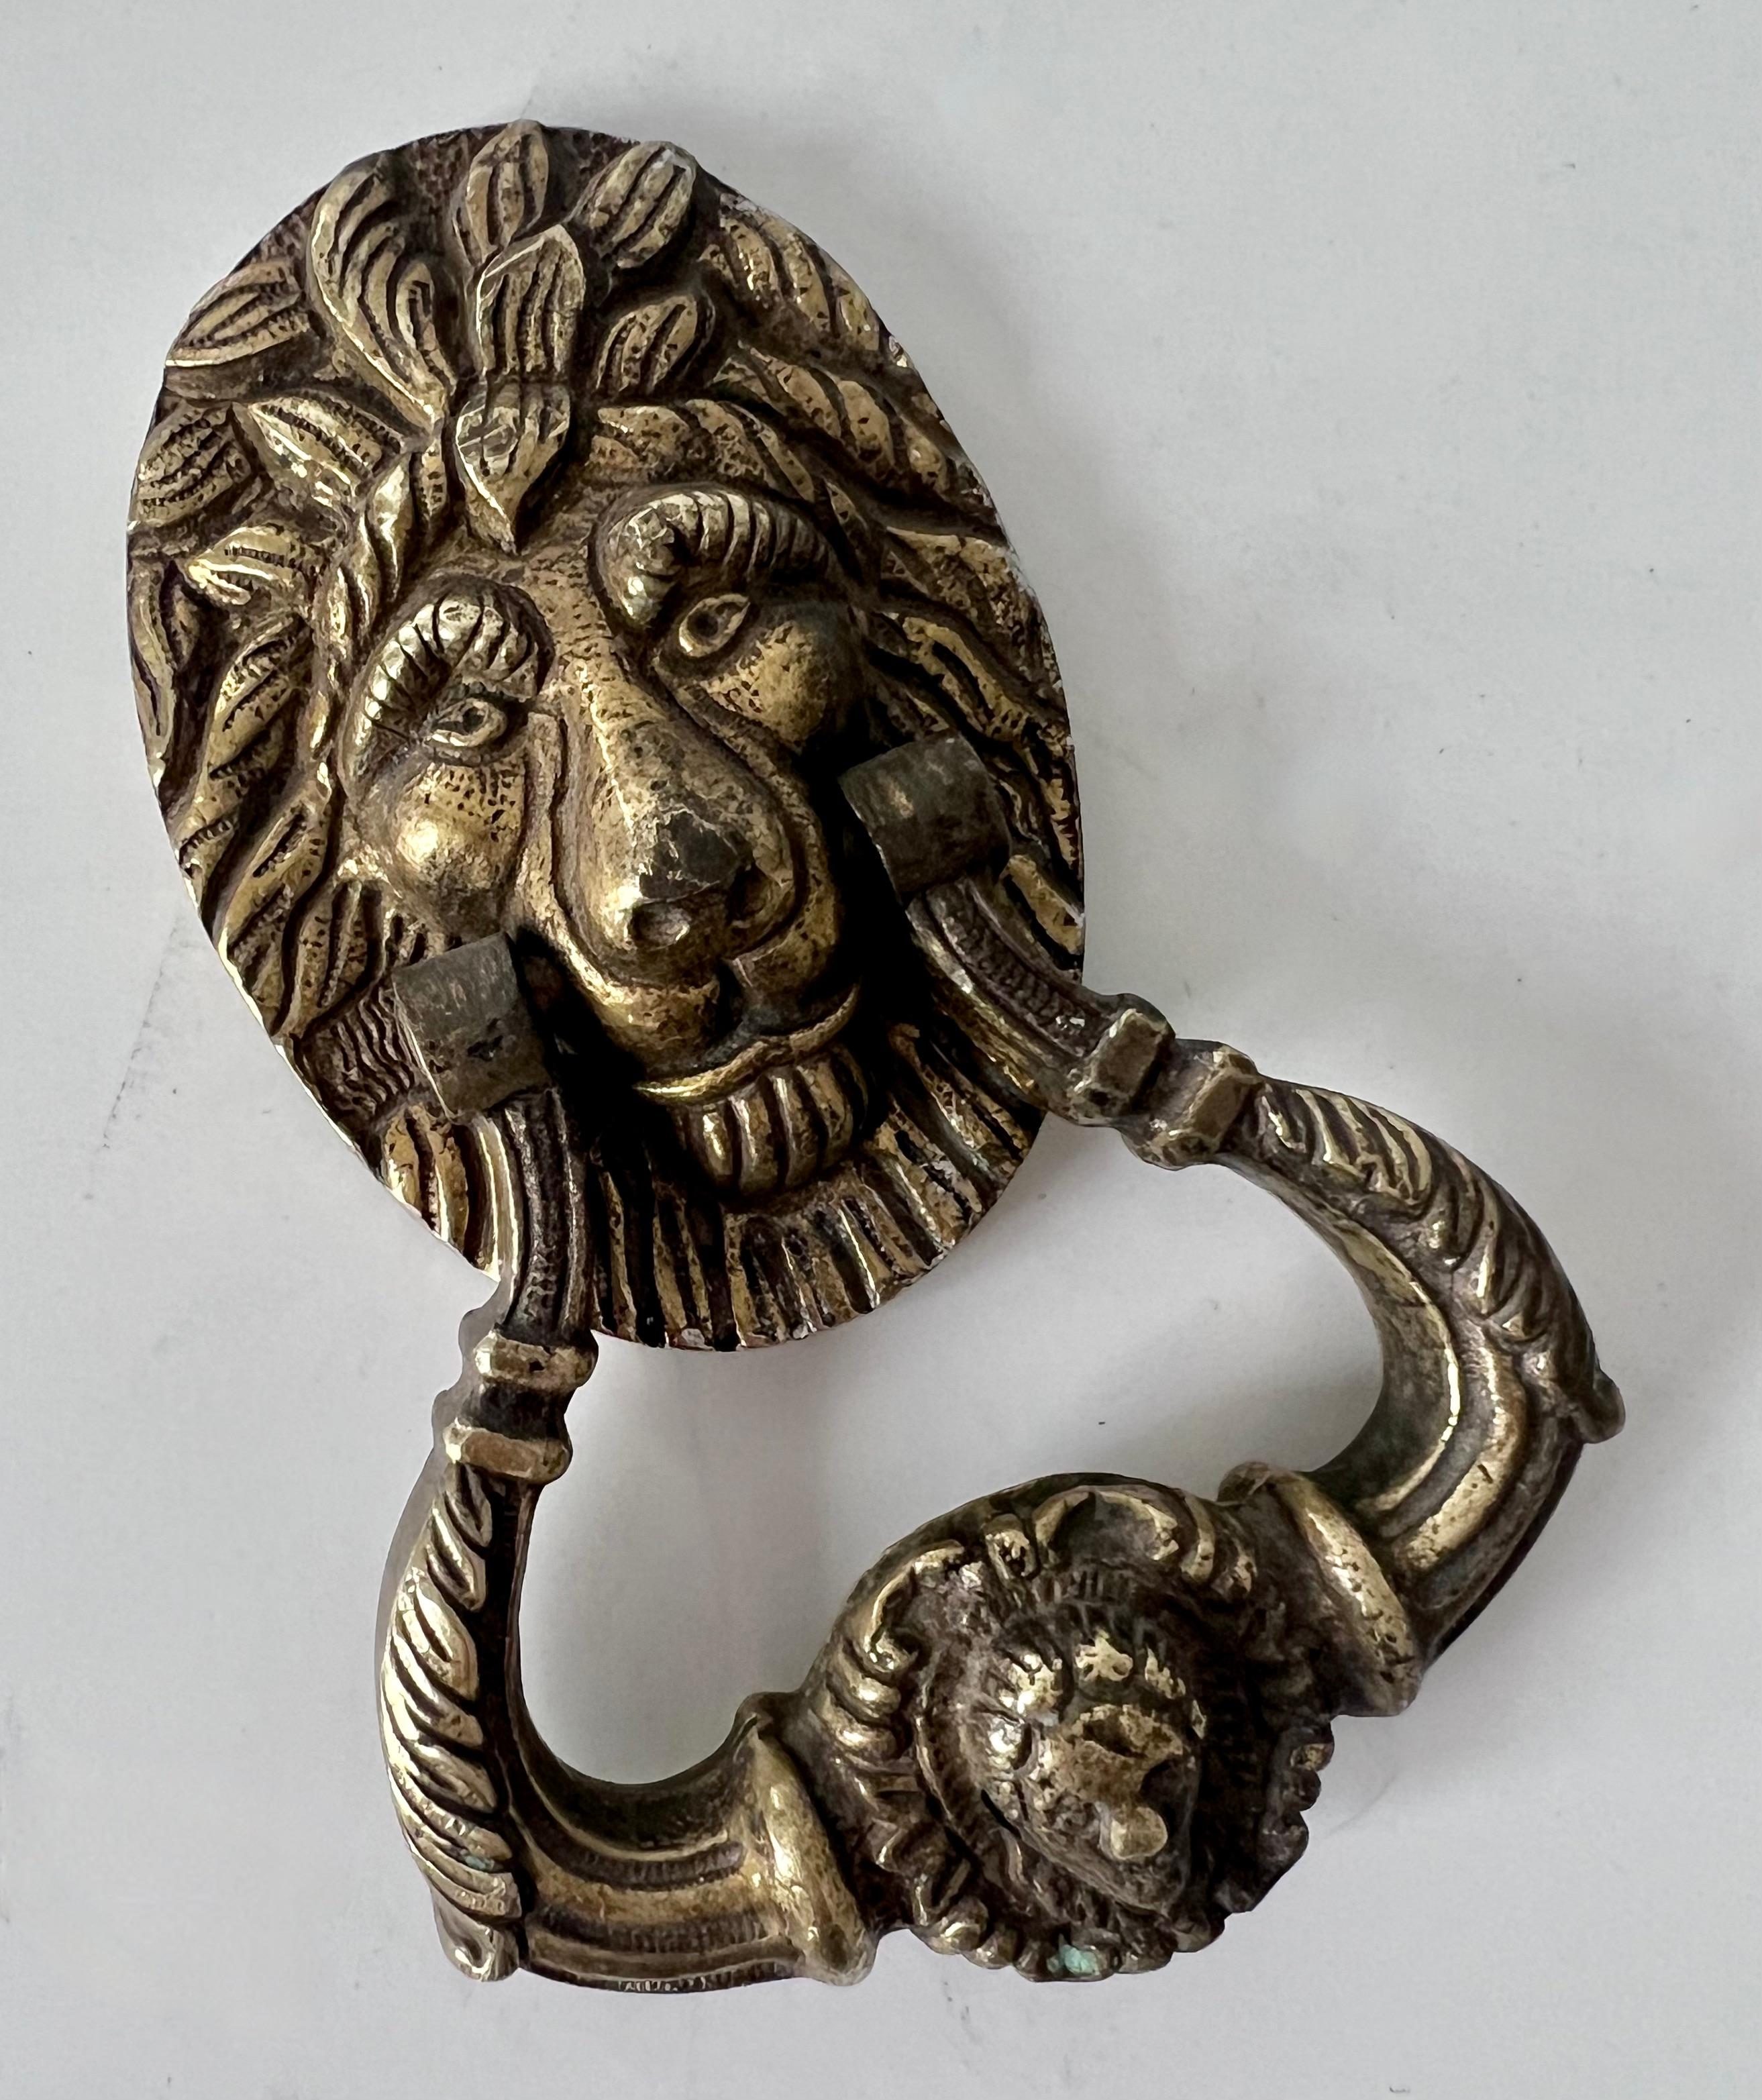 A wonderfully exaggerated lion in solid Brass - a door knocker acquired in Paris France.  A perfect setting for a door, entry in the front or rear or even an interior.